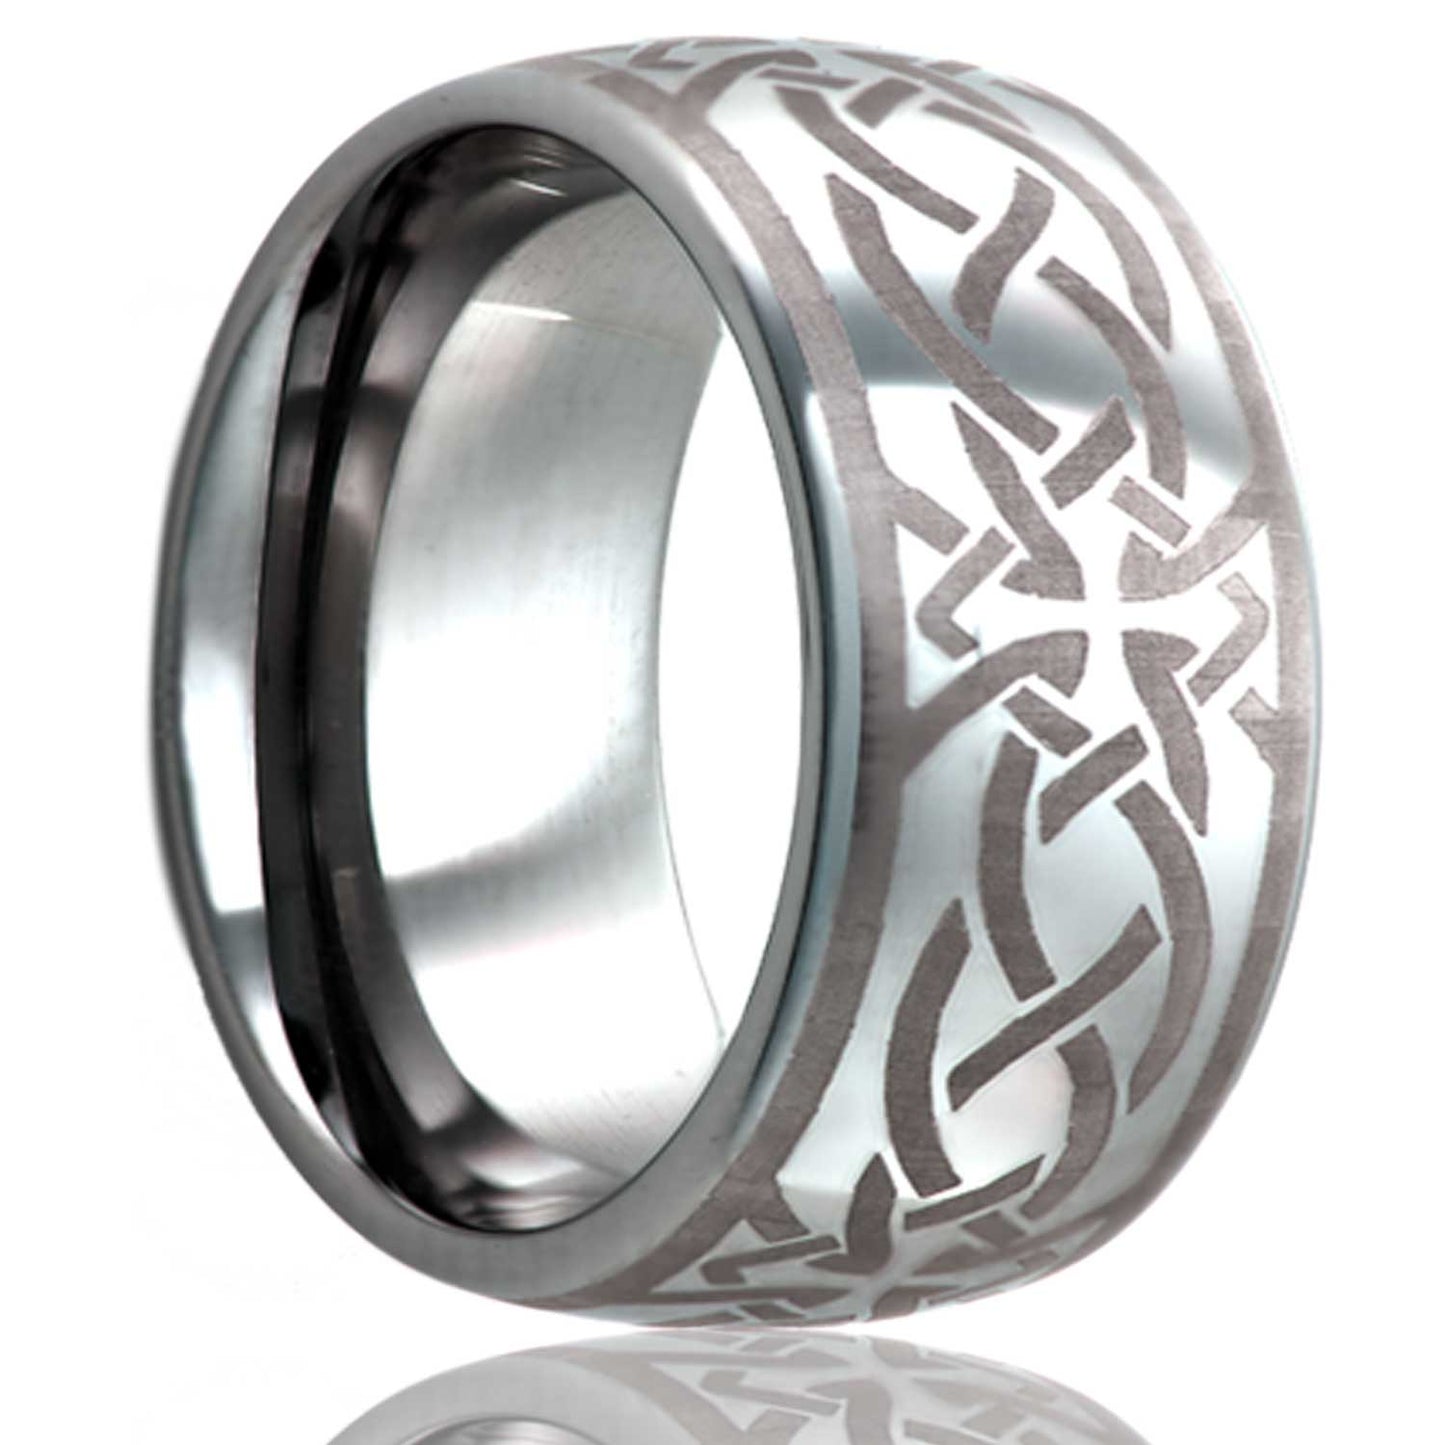 A celtic cross knot domed cobalt wedding band displayed on a neutral white background.